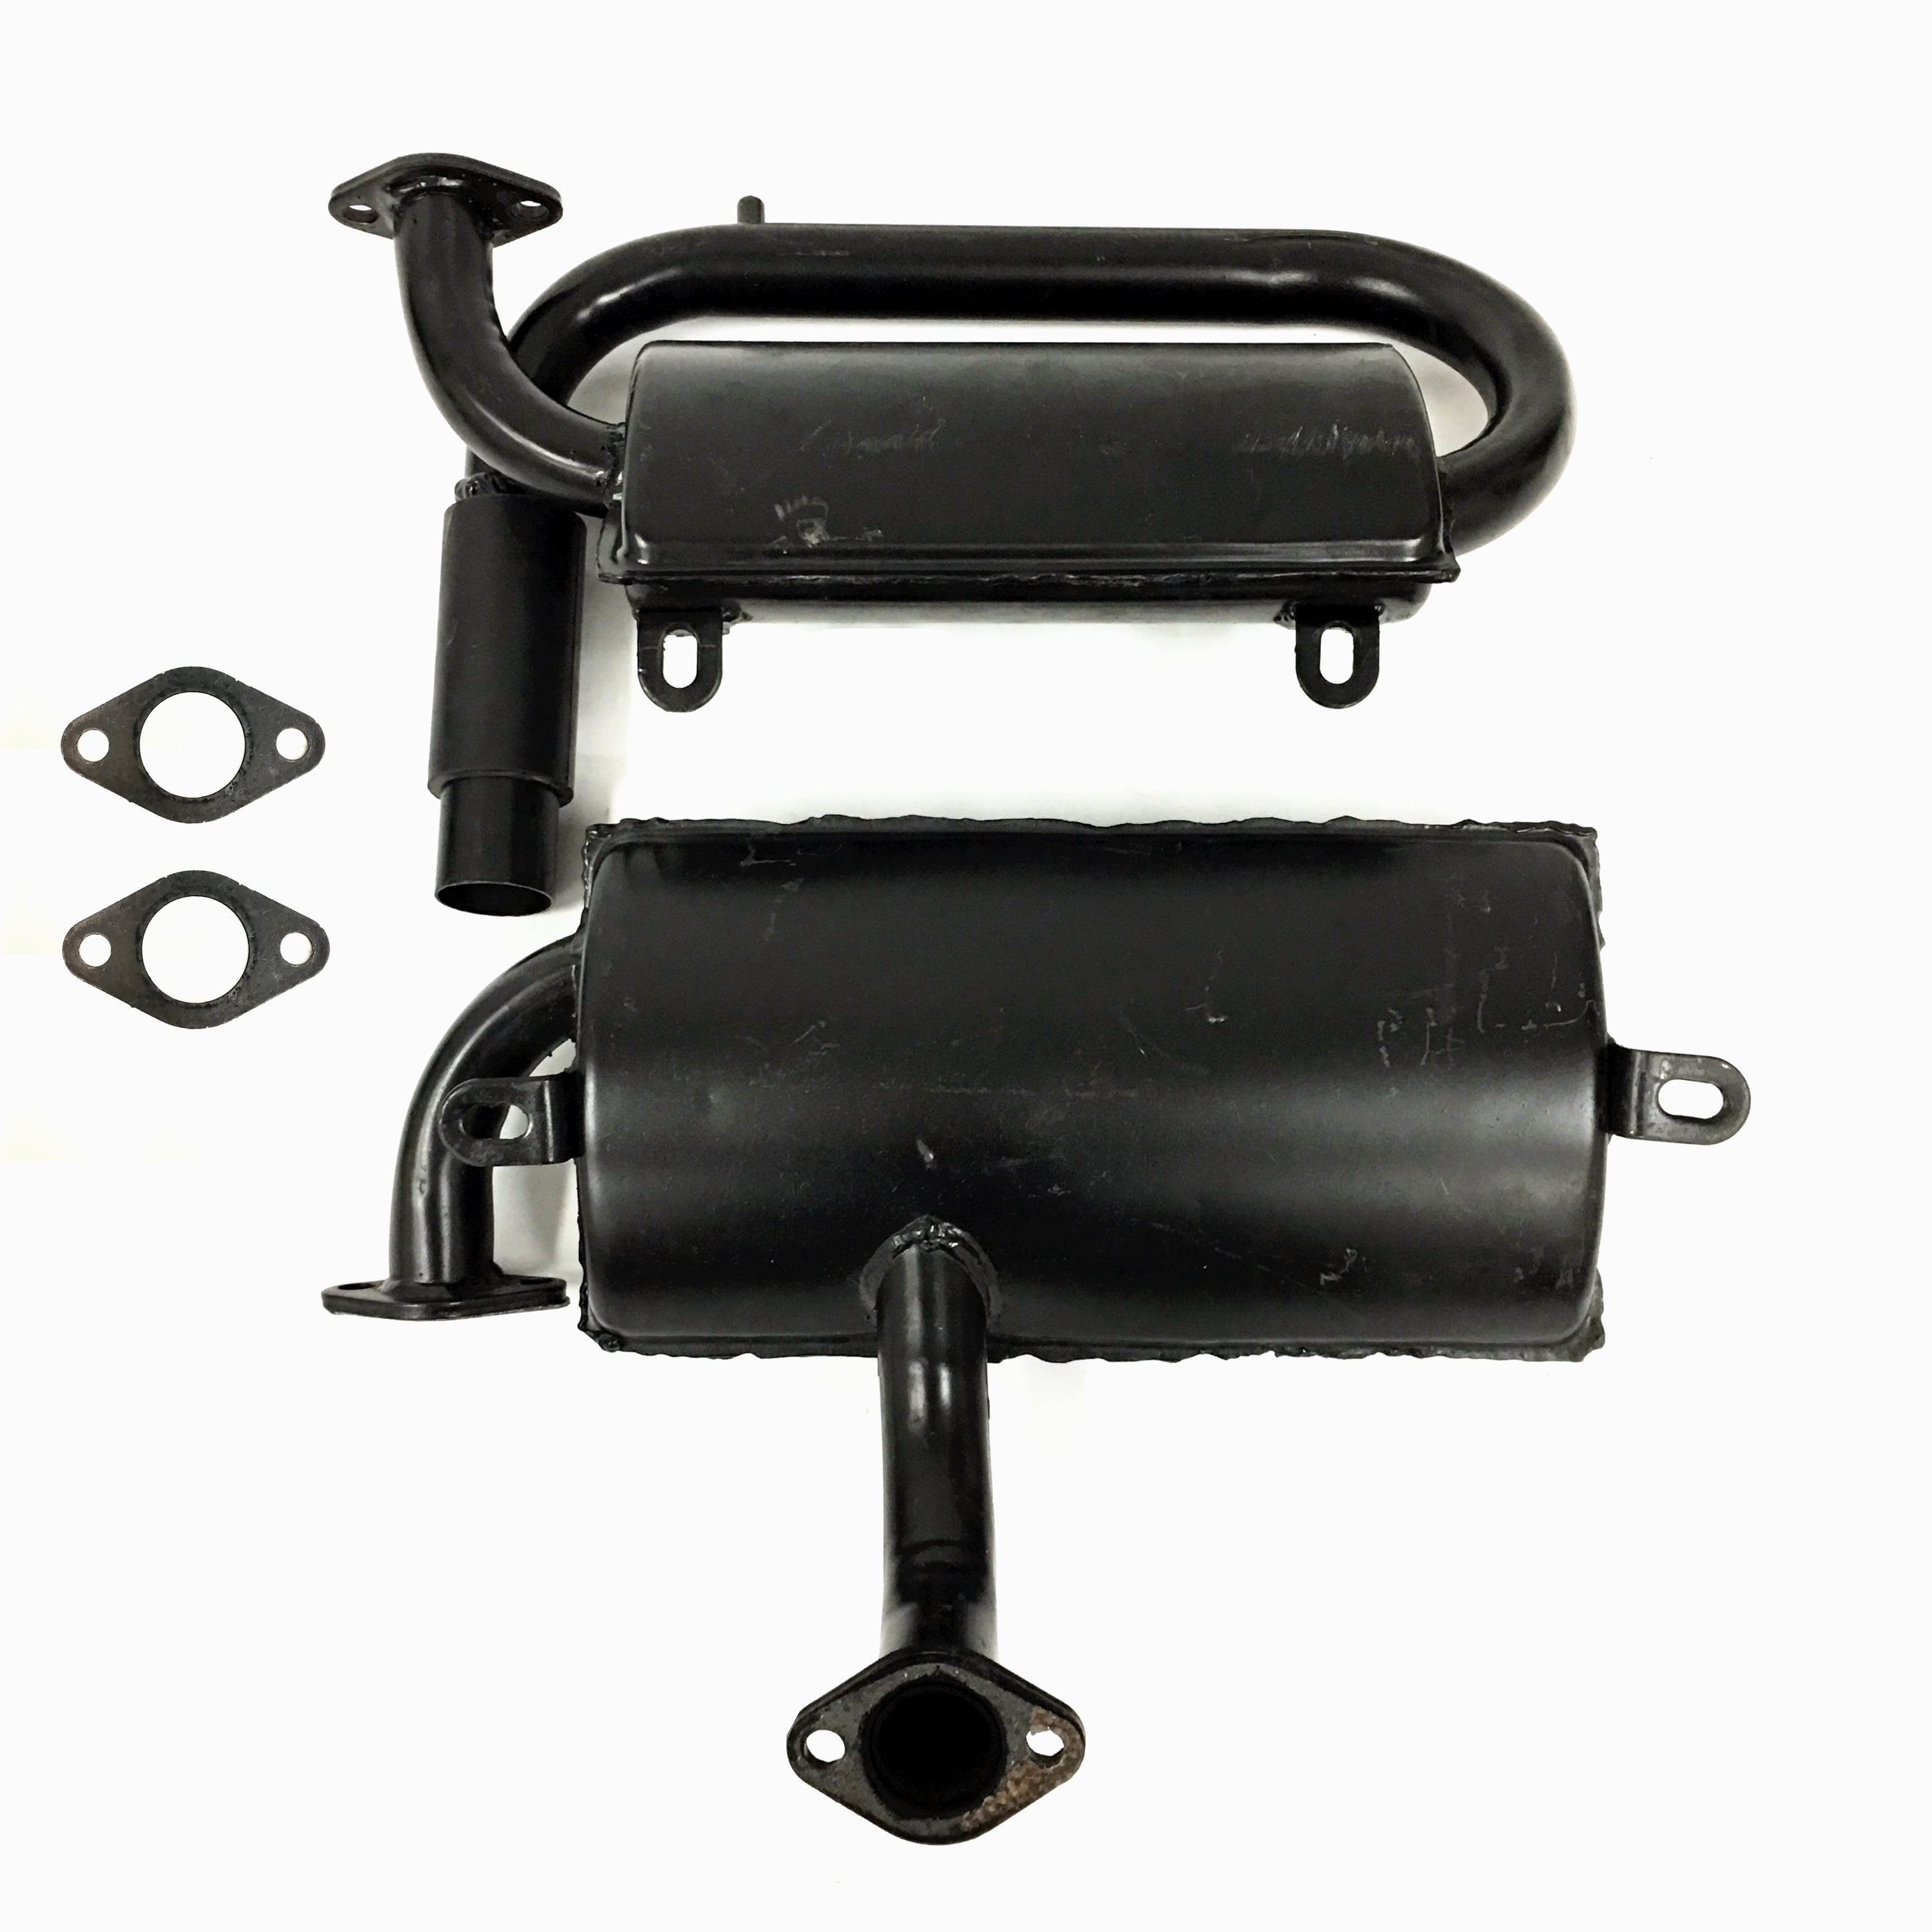 Universal Exhaust Muffler Silencer Fits For Most 2KW-Portable Gasoline Generator 